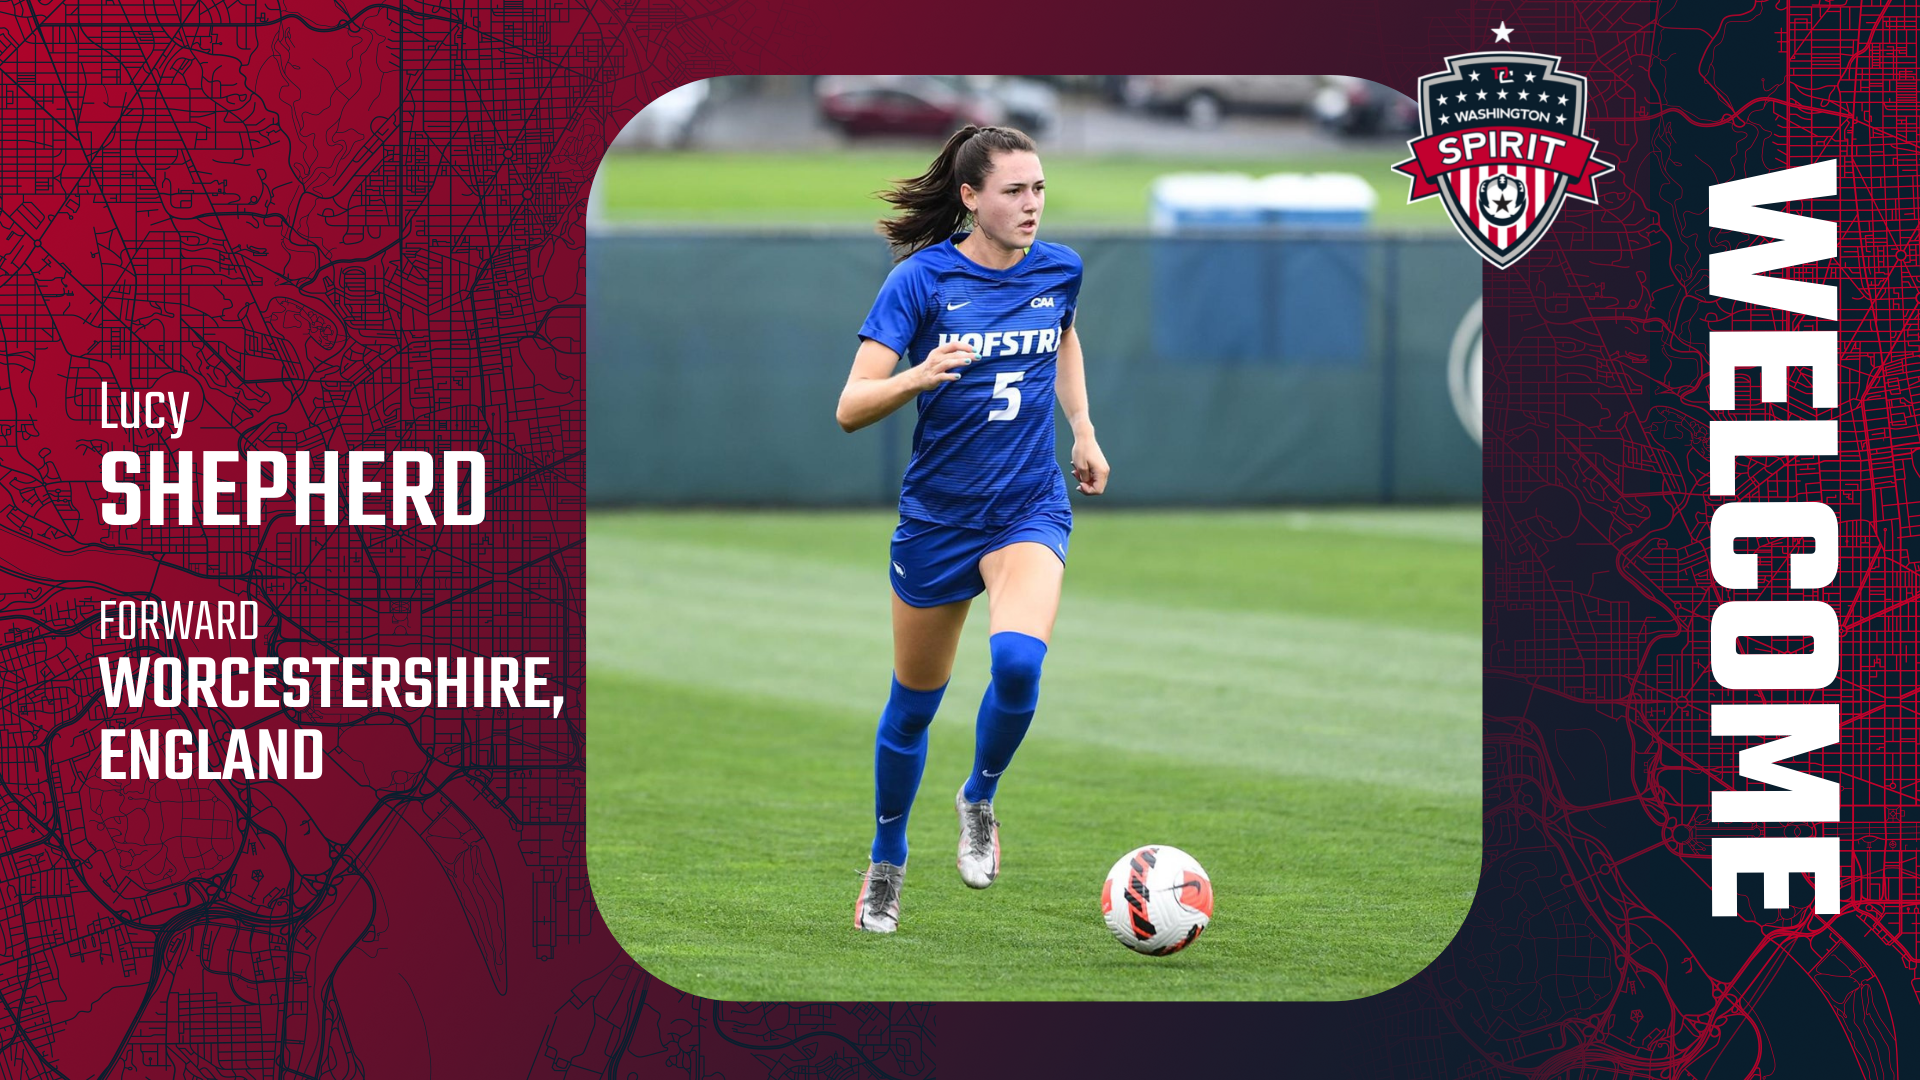 Washington Spirit select Lucy Shepherd 23rd overall in the 2022 NWSL Draft Featured Image